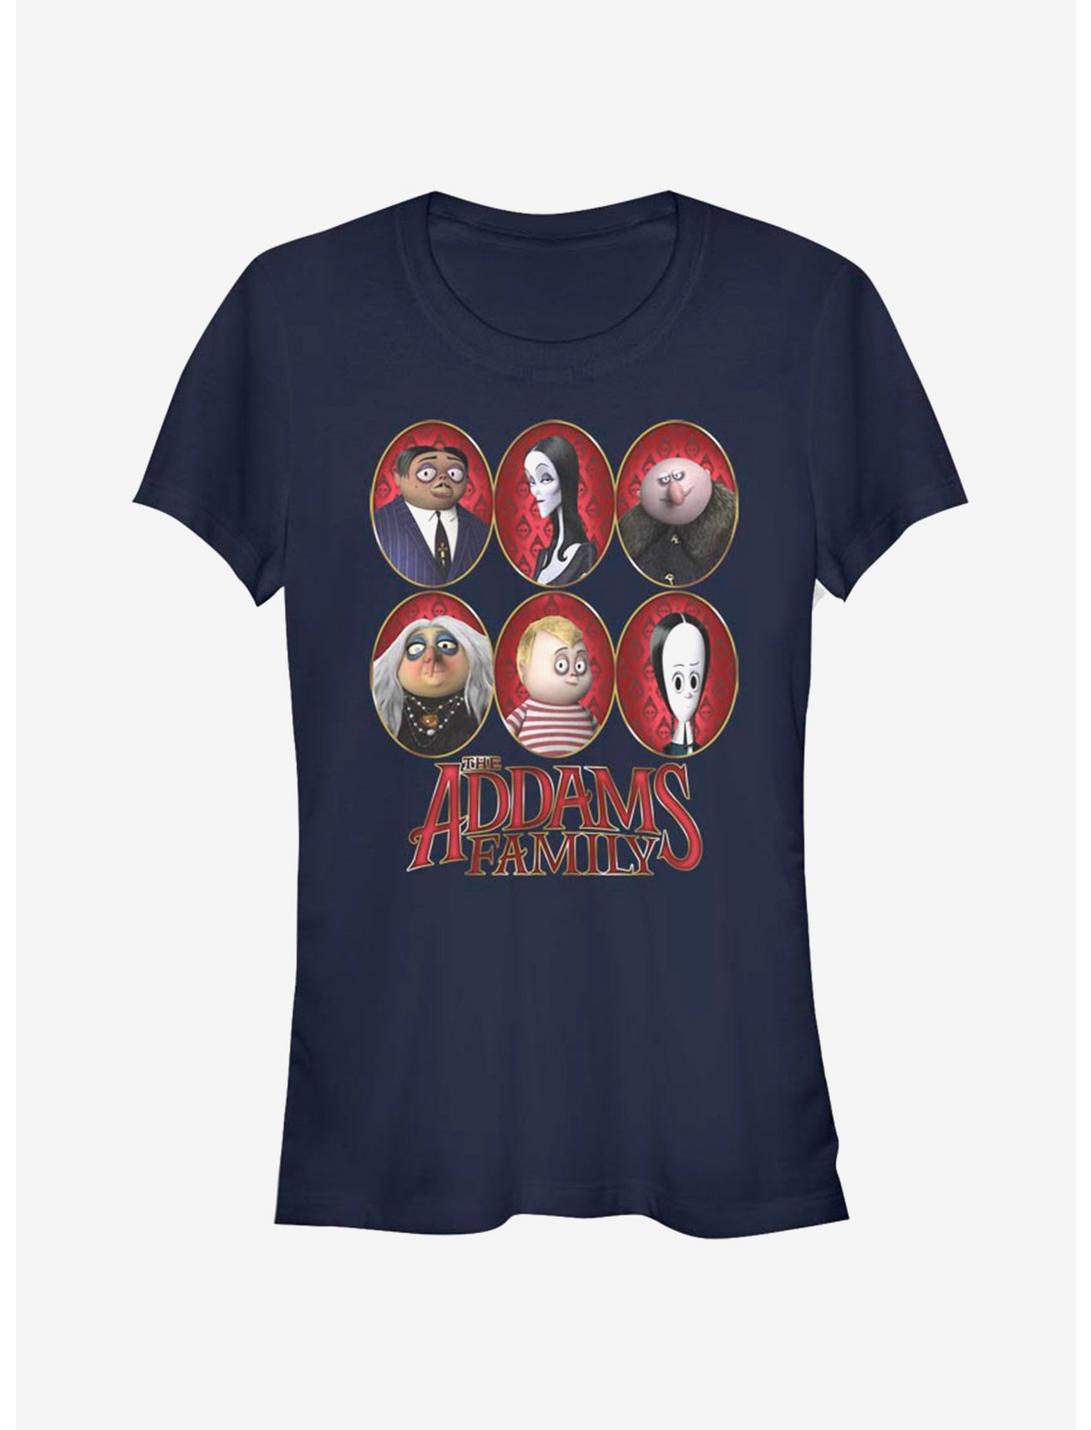 The Addams Family Family Portrait Girls T-Shirt, NAVY, hi-res